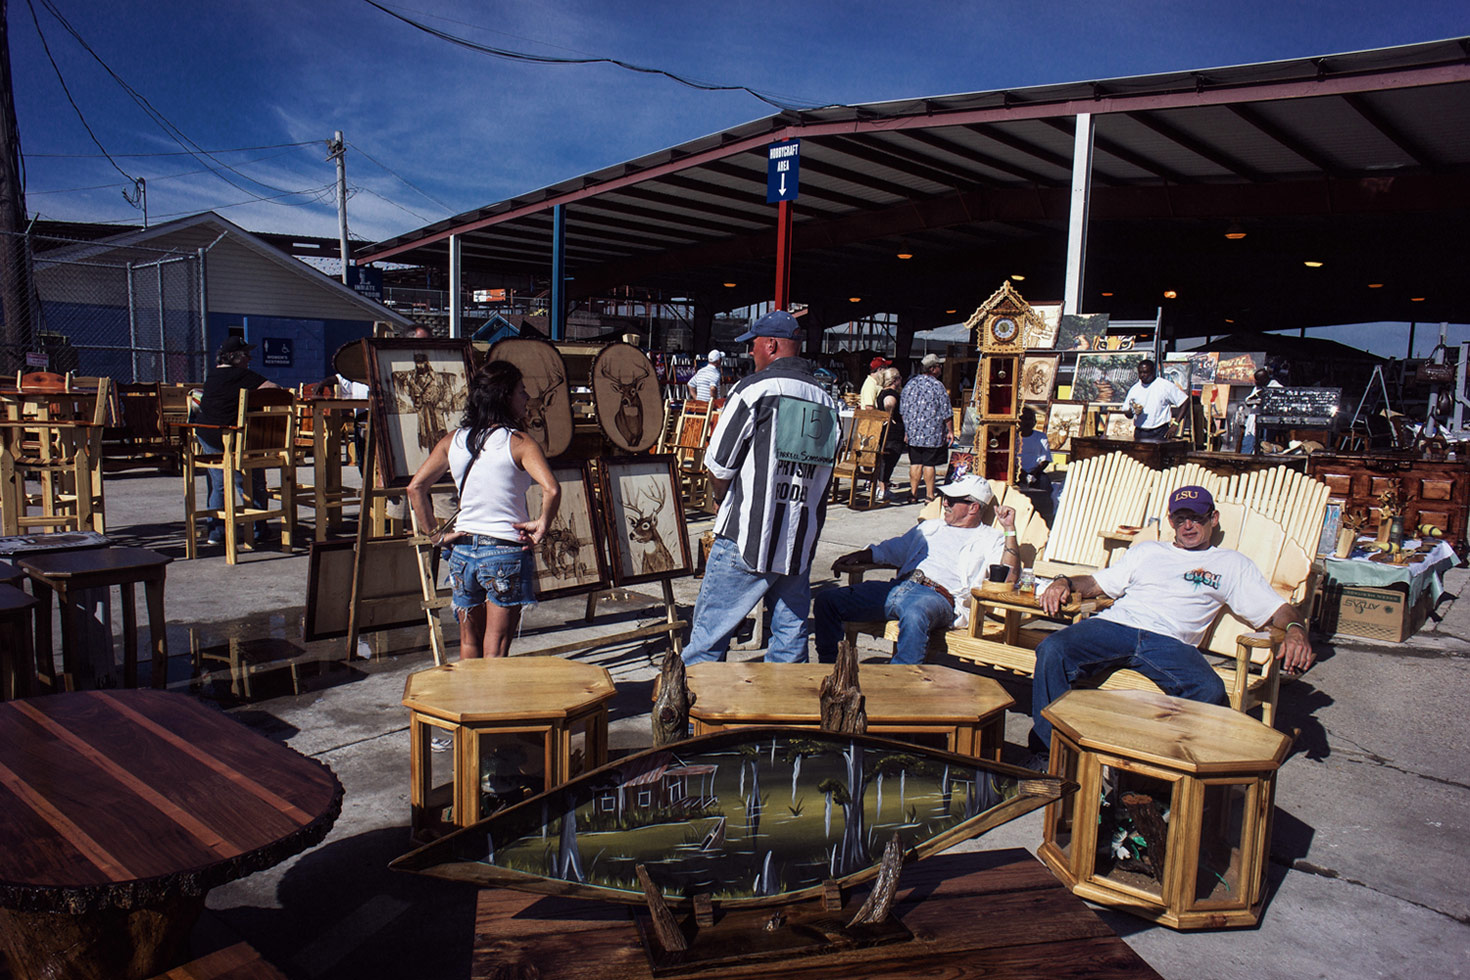 Inmates sell their furniture at the arts and crafts area behind the rodeo stadium. The arts and crafts items are sold by the prisoners, with all financial transactions overseen by the guards. Likewise, some inmates earn the right to the sell food and snacks at concession stands.